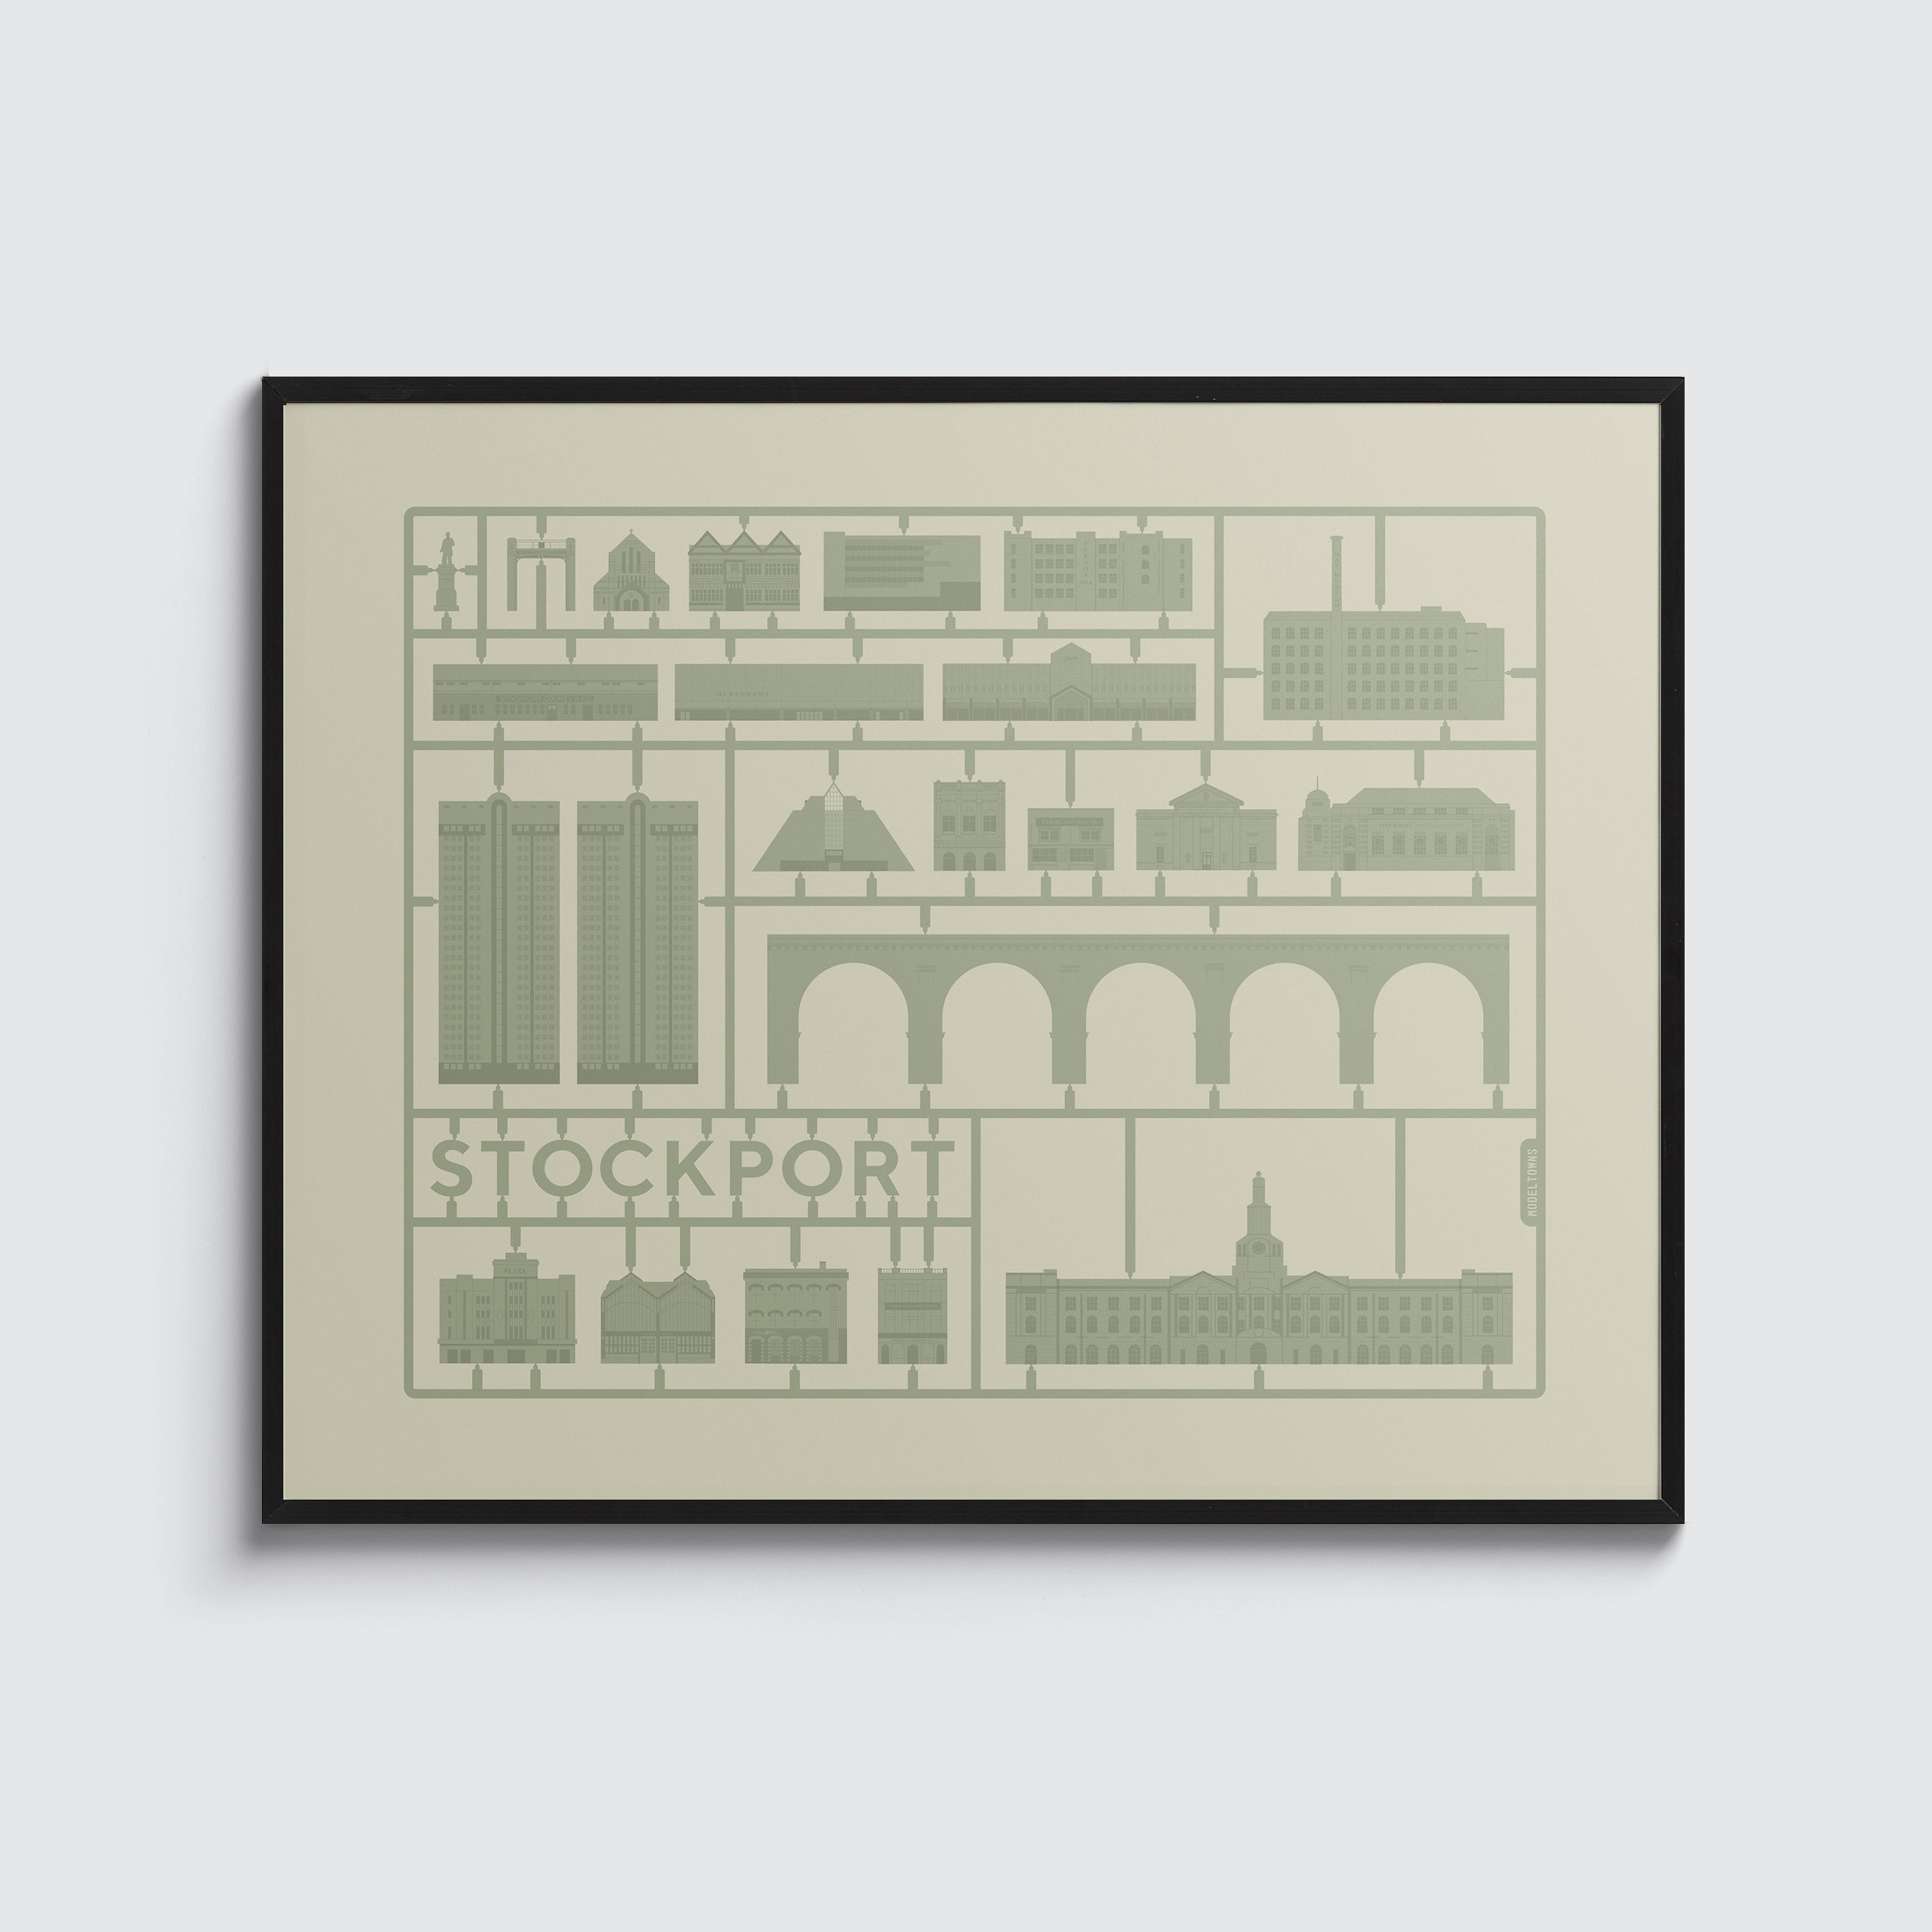 Model Towns – Stockport